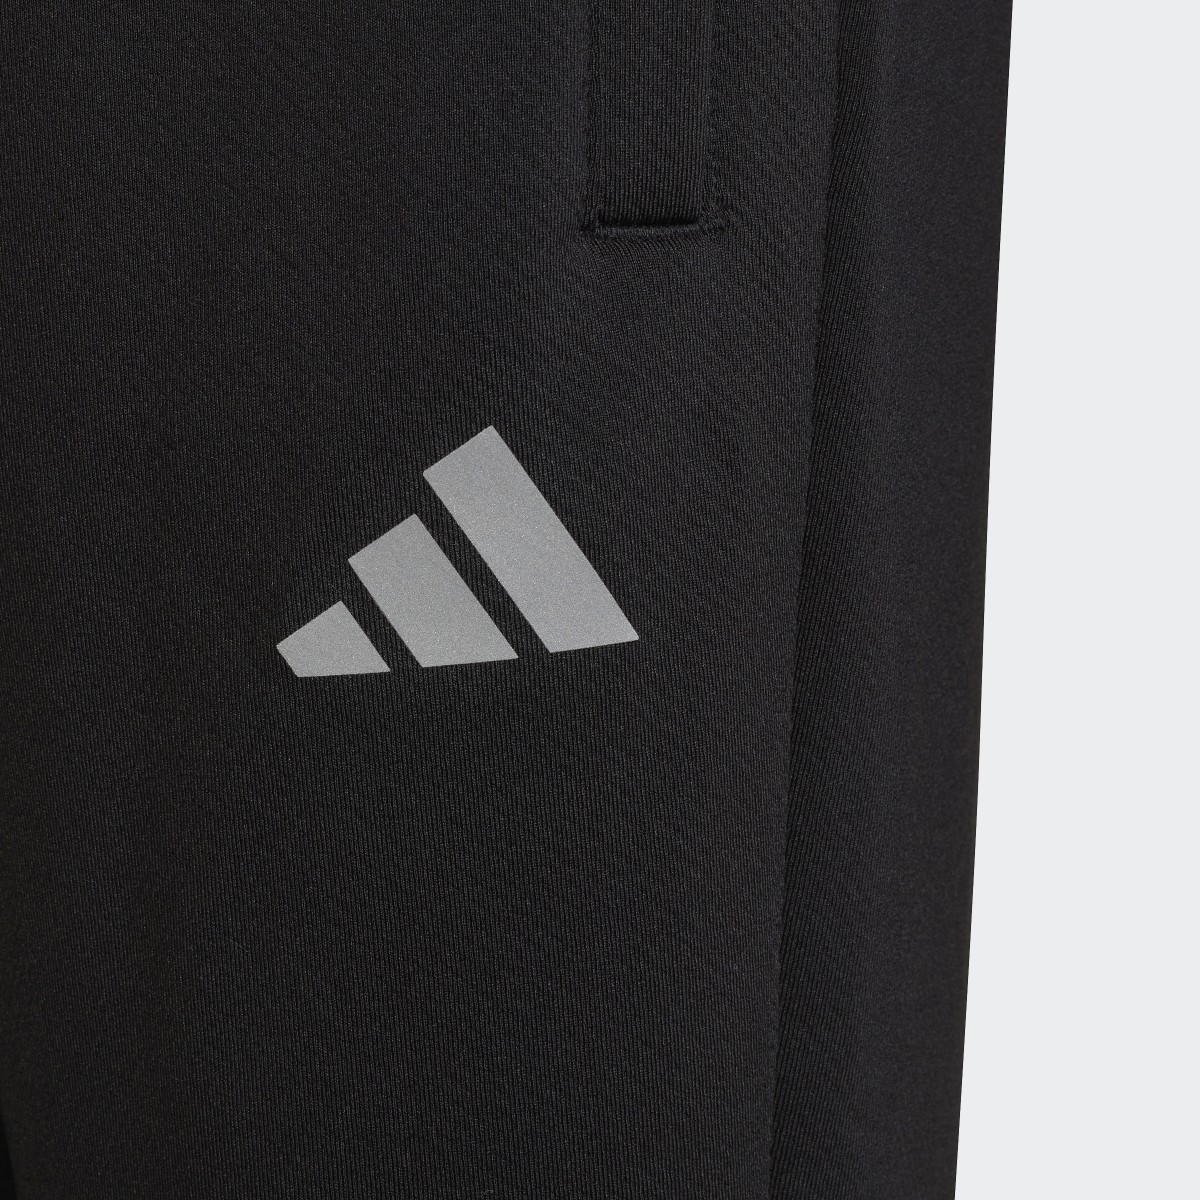 Adidas COLD.RDY Sport Icons Training Pants. 5